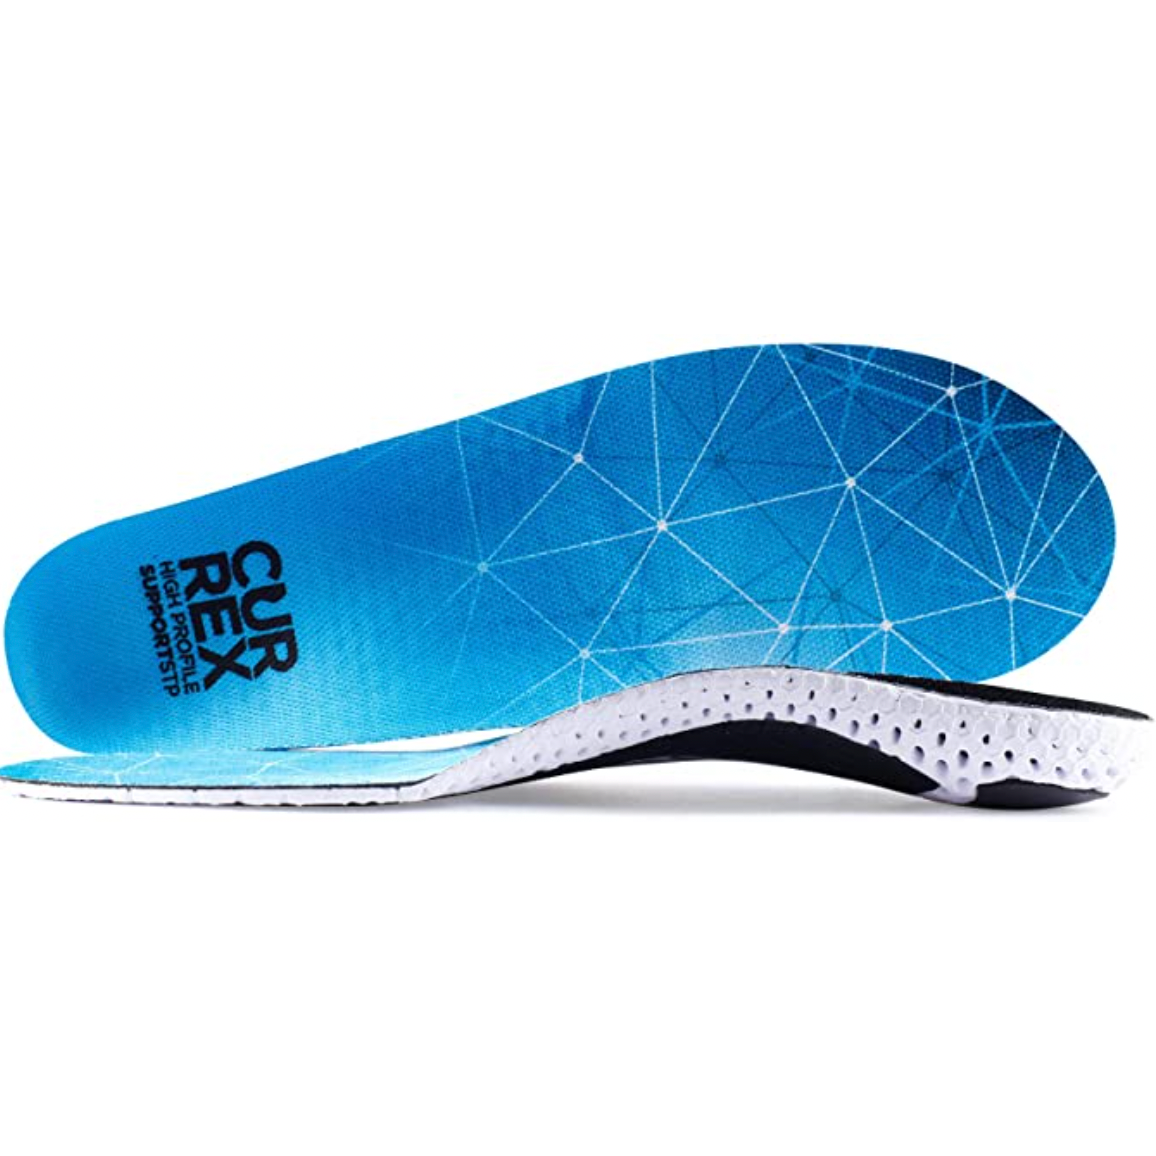 Currex-CURREX SupportSTP Insole-Blue (High Profile)-Pacers Running